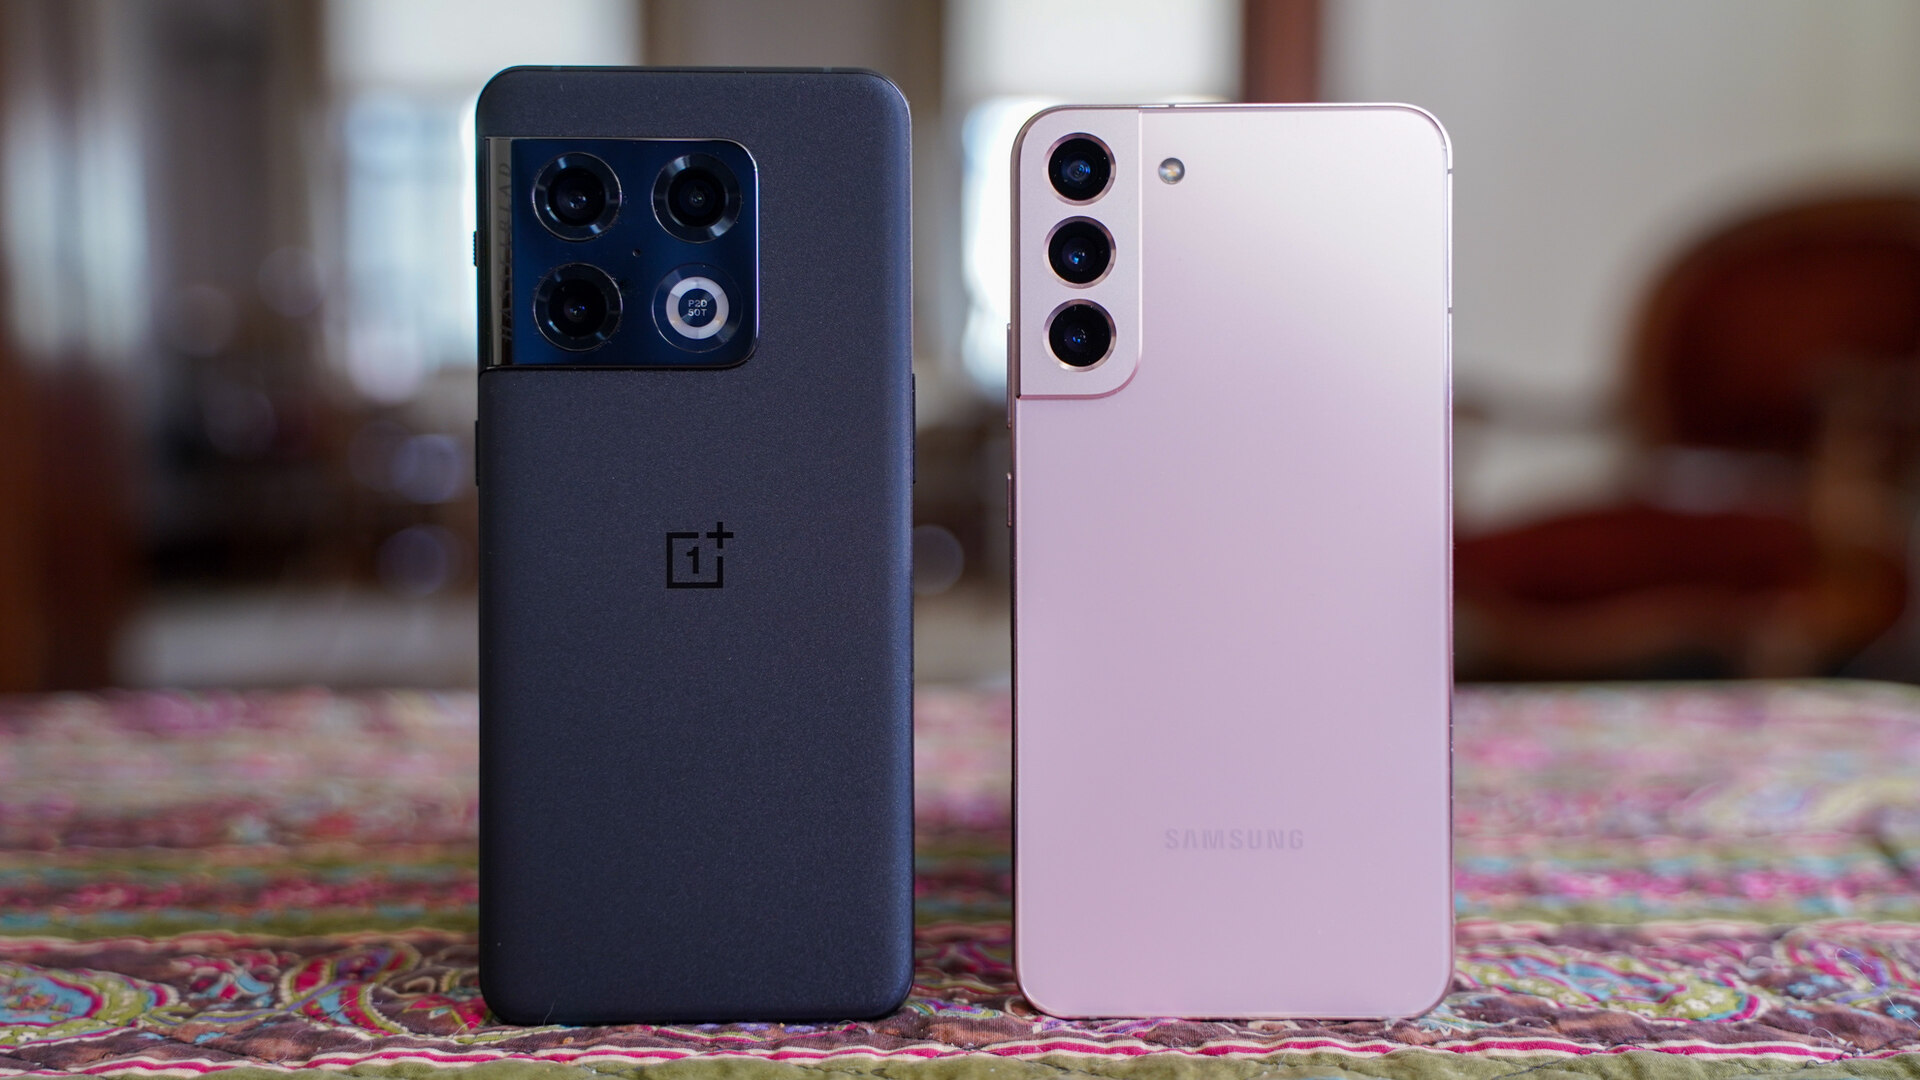 oneplus-10t-vs-samsung-galaxy-s22-should-you-pay-150-more